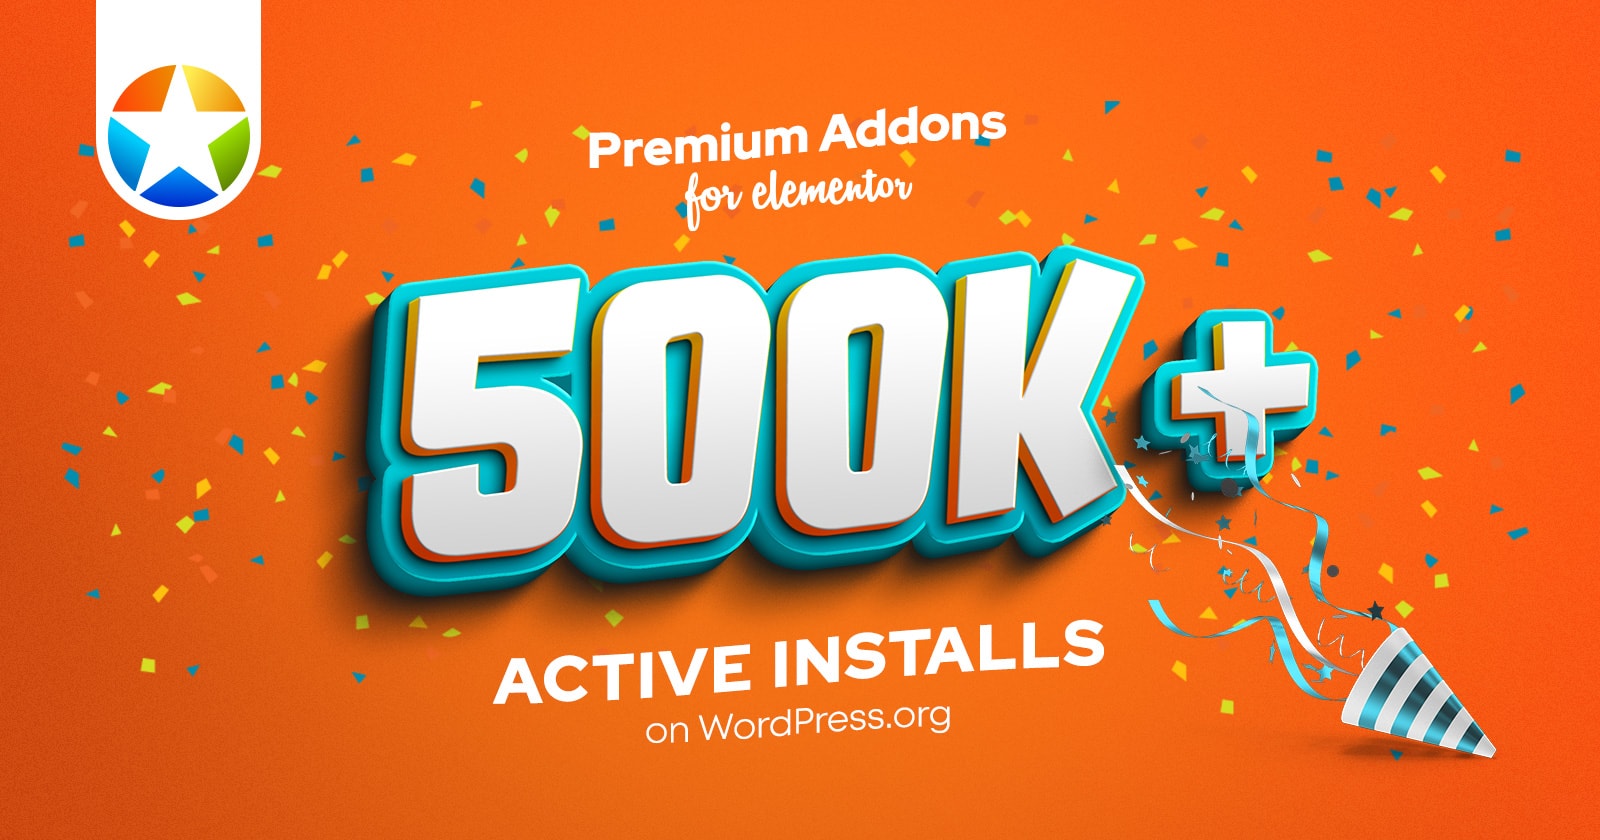 Read more about the article Celebrating: Premium Addons Reached 500K+ Active Installs on WordPress.org